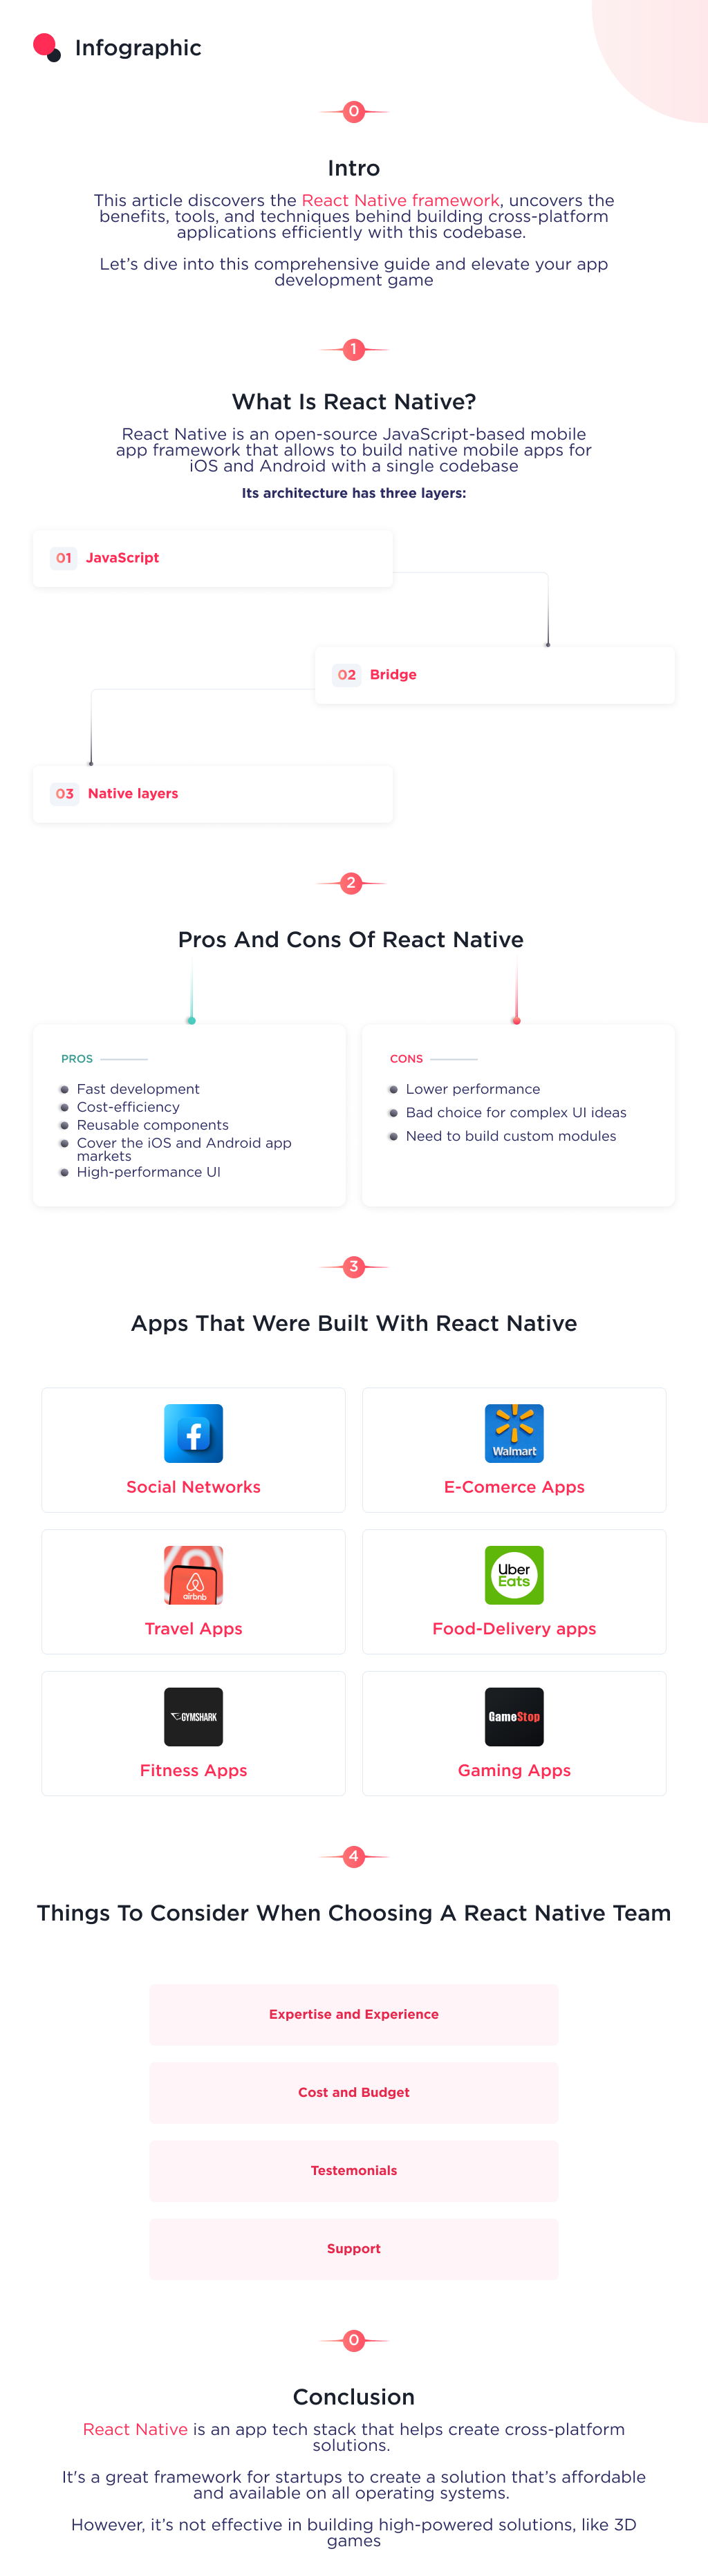 This infographic shows how to develop React Native applications